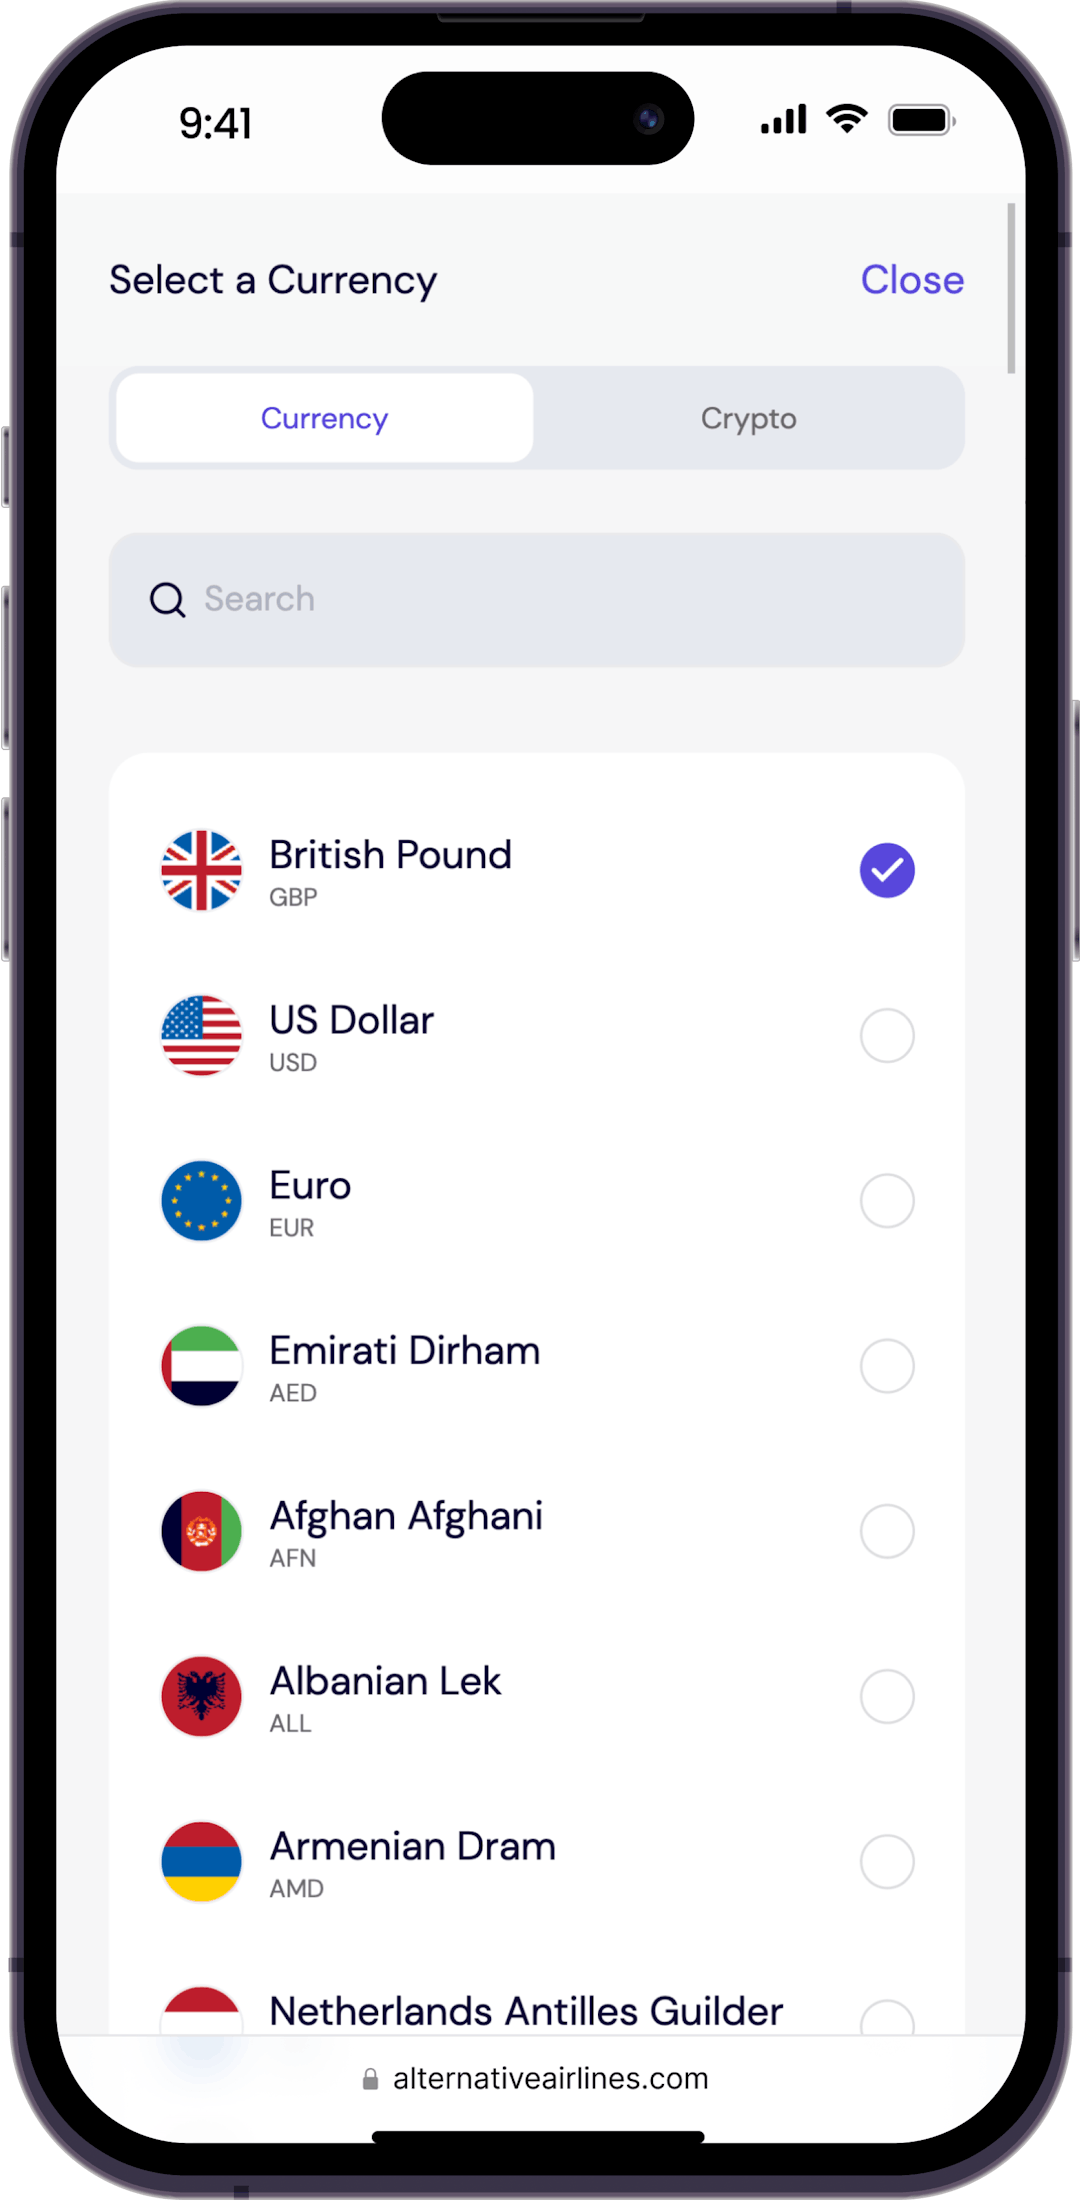 Step 3 - Type 'GBP' in the search bar to find flight in British Pounds